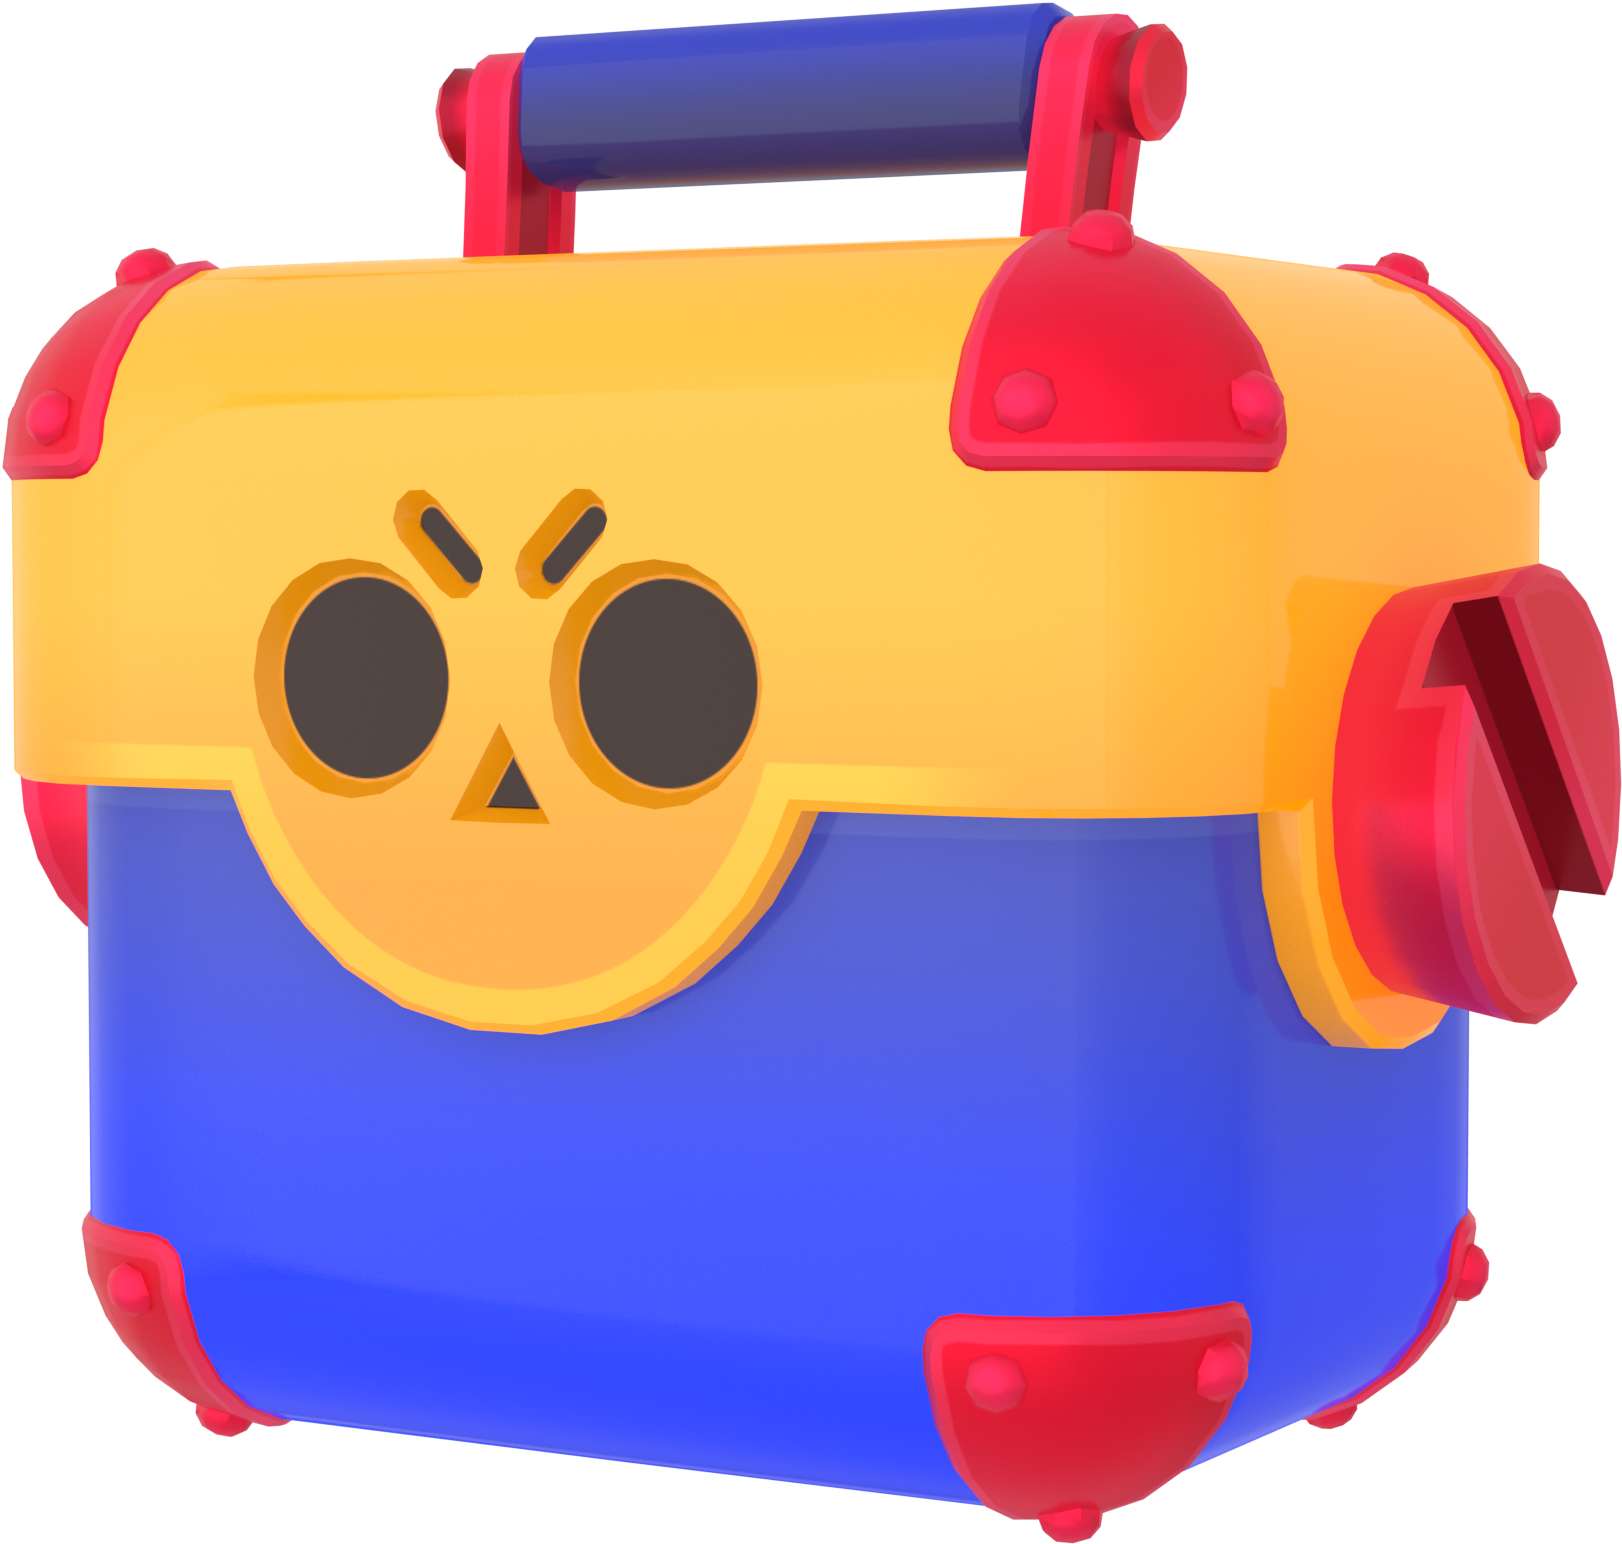 A Colorful Toy Box With A Face On It